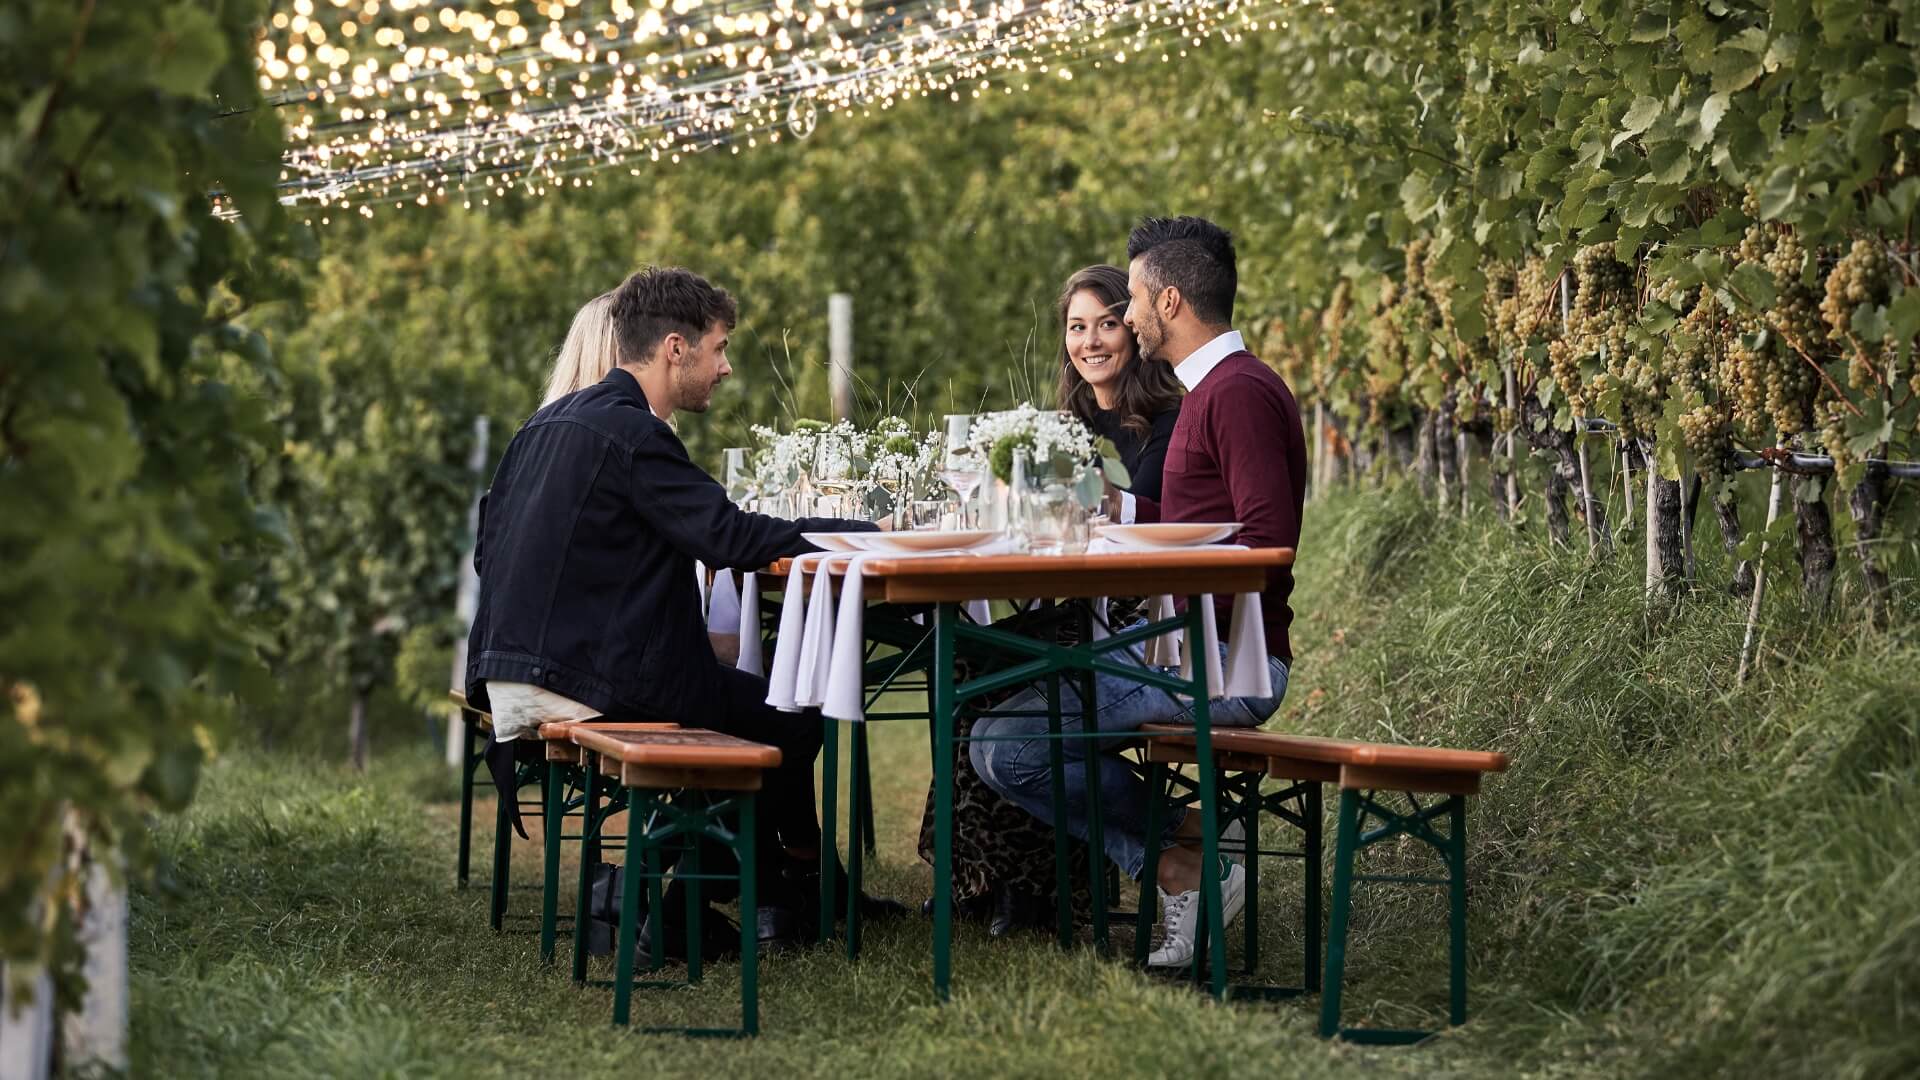 Four people have taken a seat on a decorated wide beer garden table set and enjoy the day outside in nature.